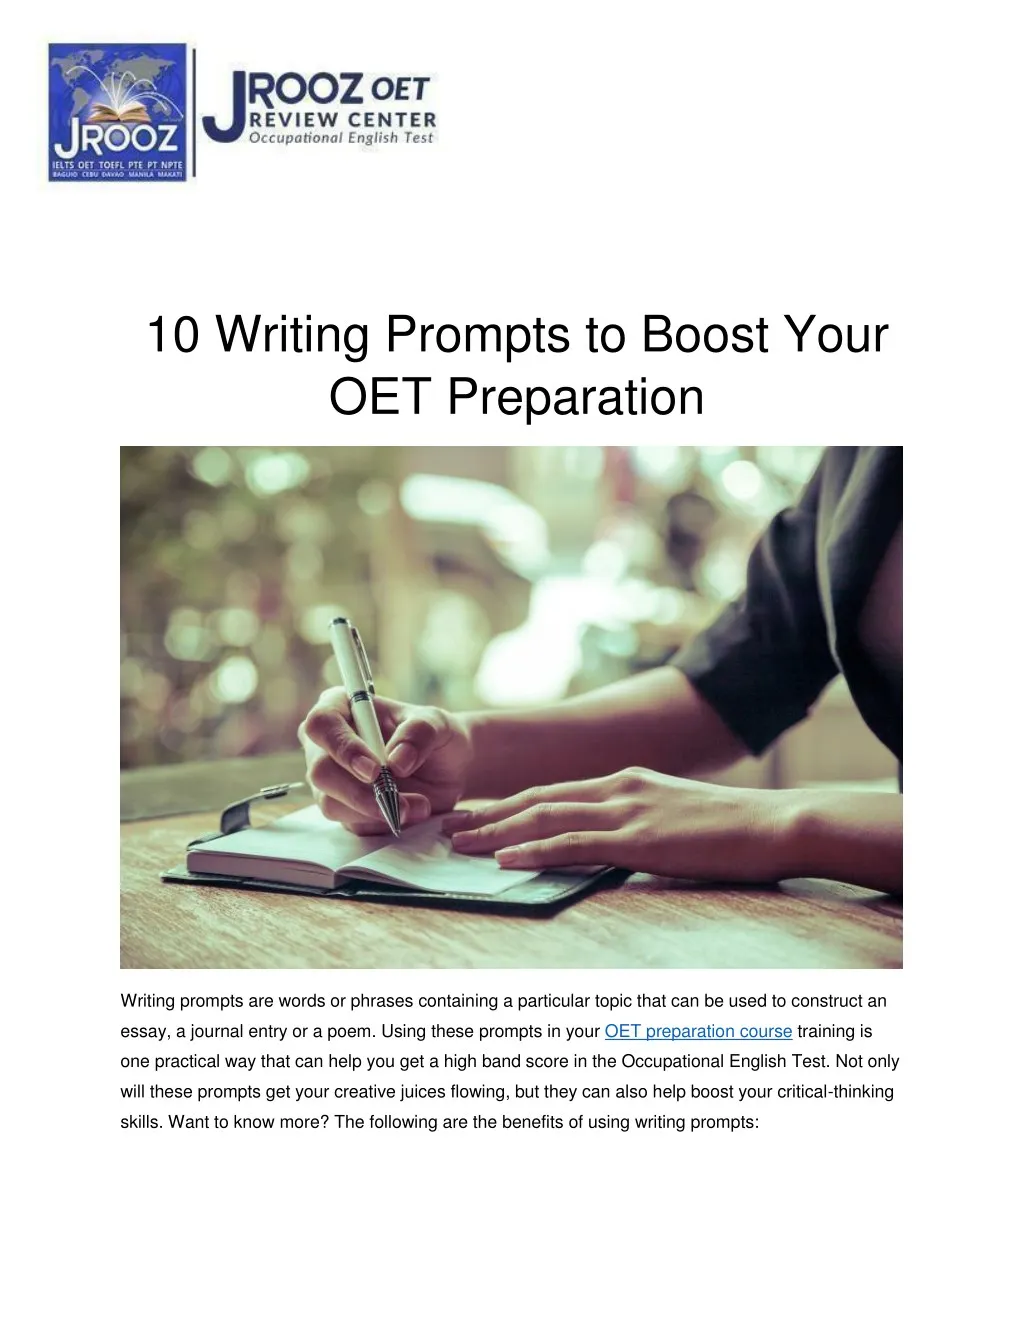 10 writing prompts to boost your oet preparation